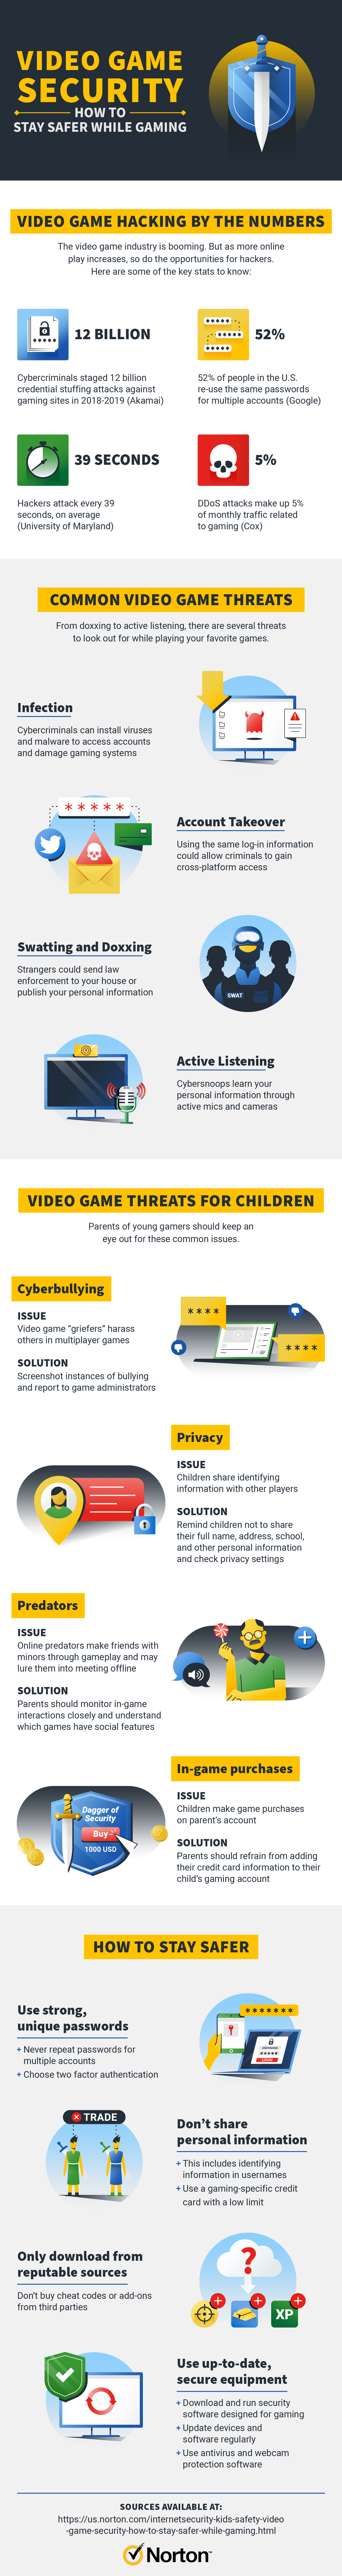 video game security infographic